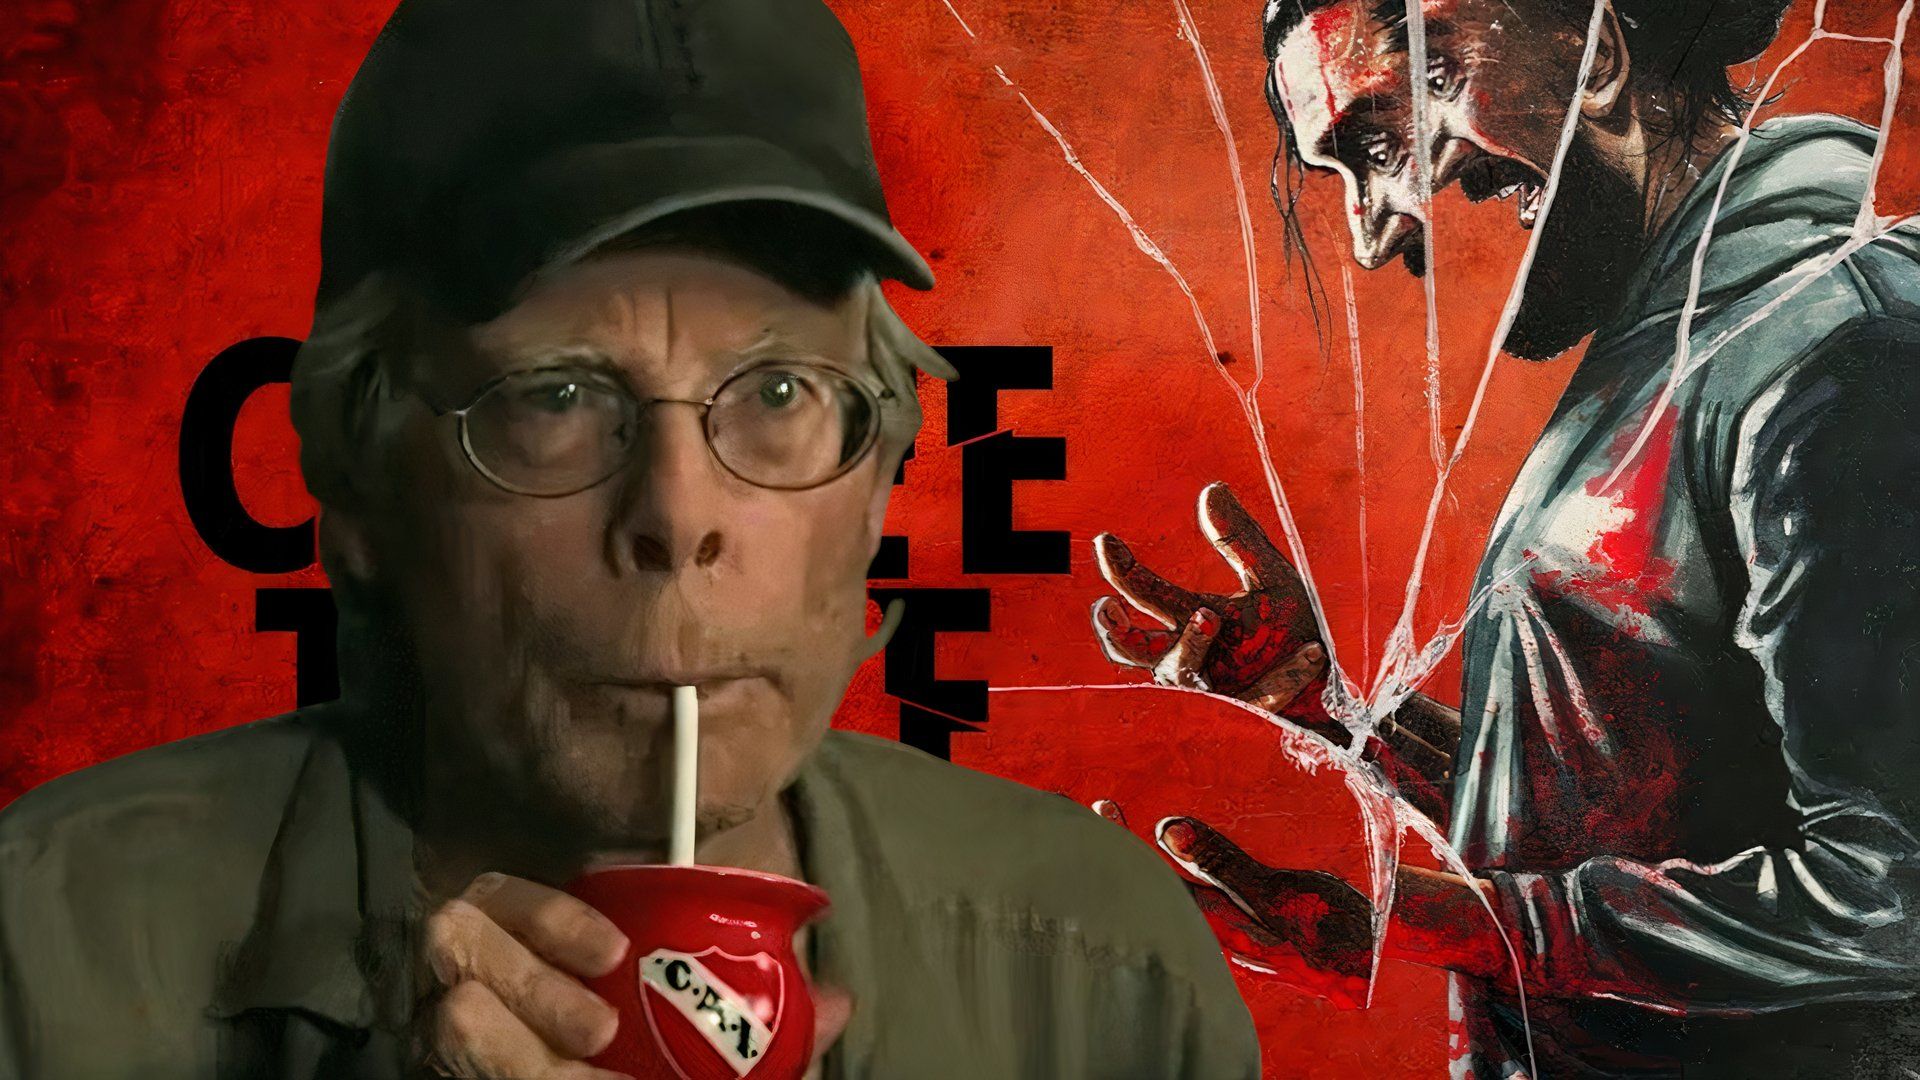 Stephen King sipping a drink over the poster for The Coffee Table